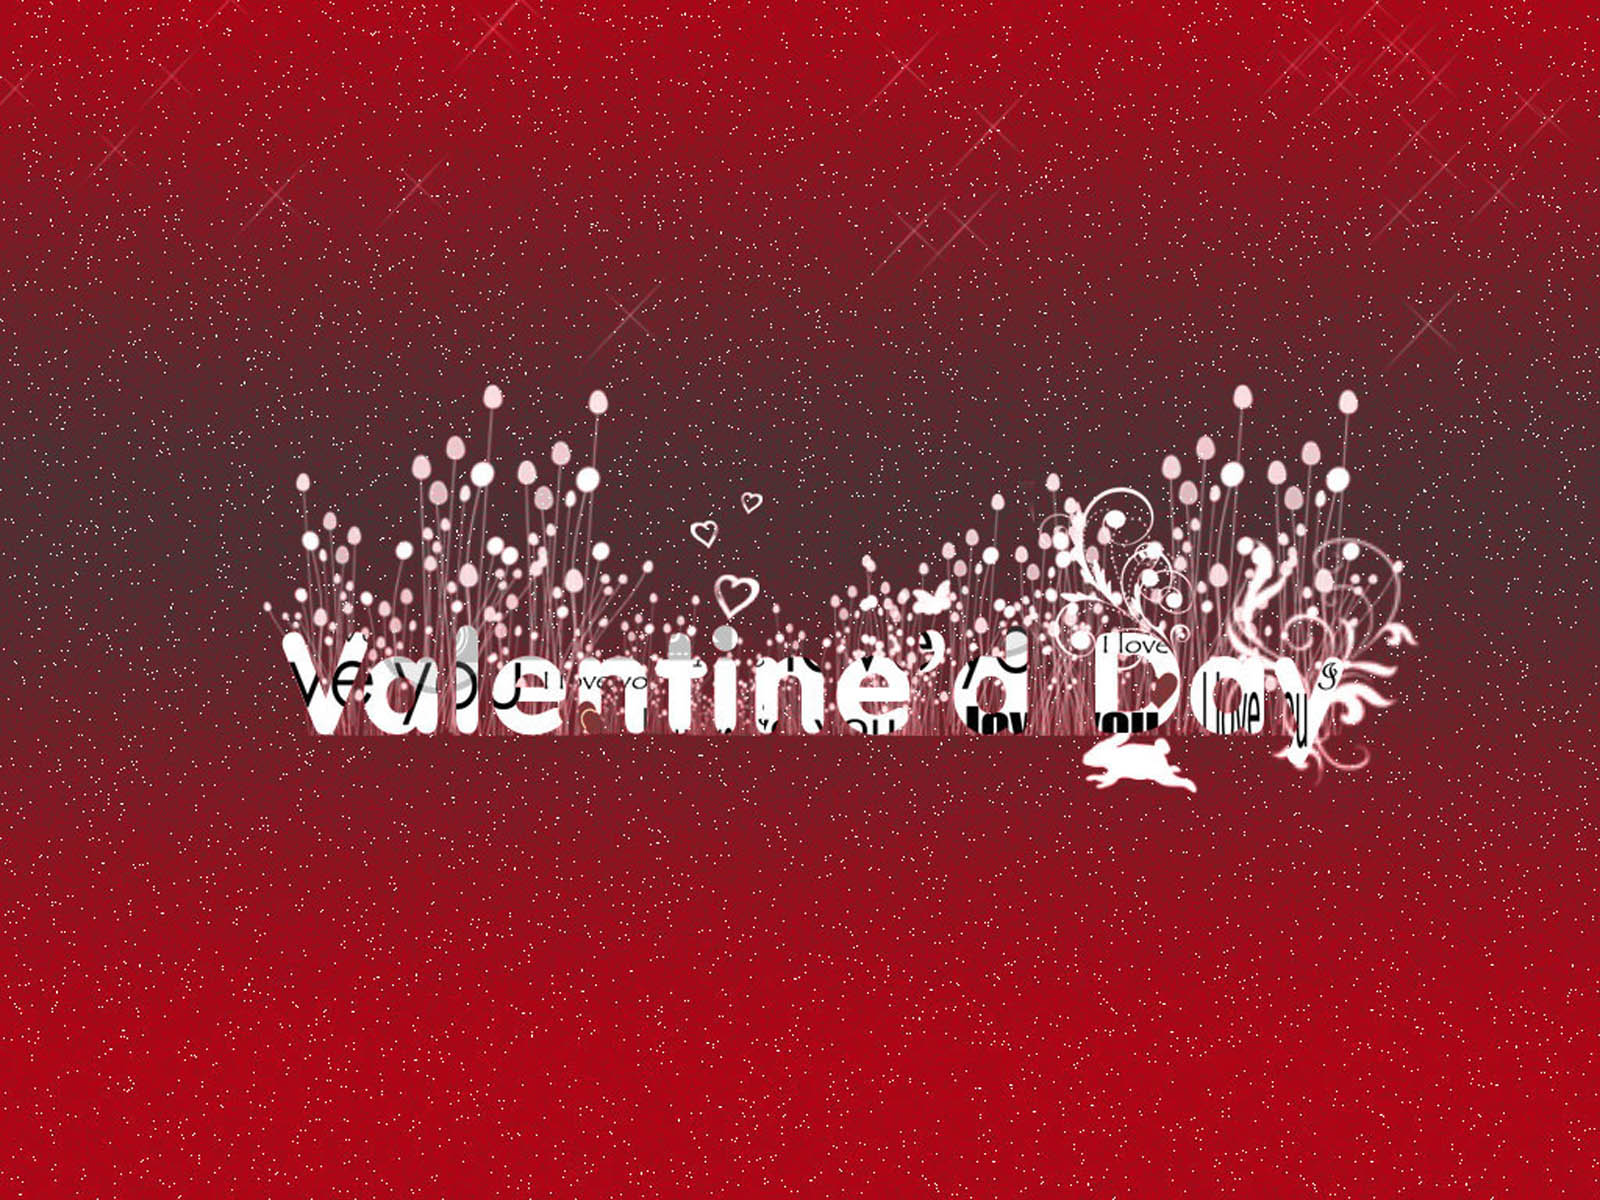  Wallpapers Valentines Day Backgrounds Valentines Day Desktop